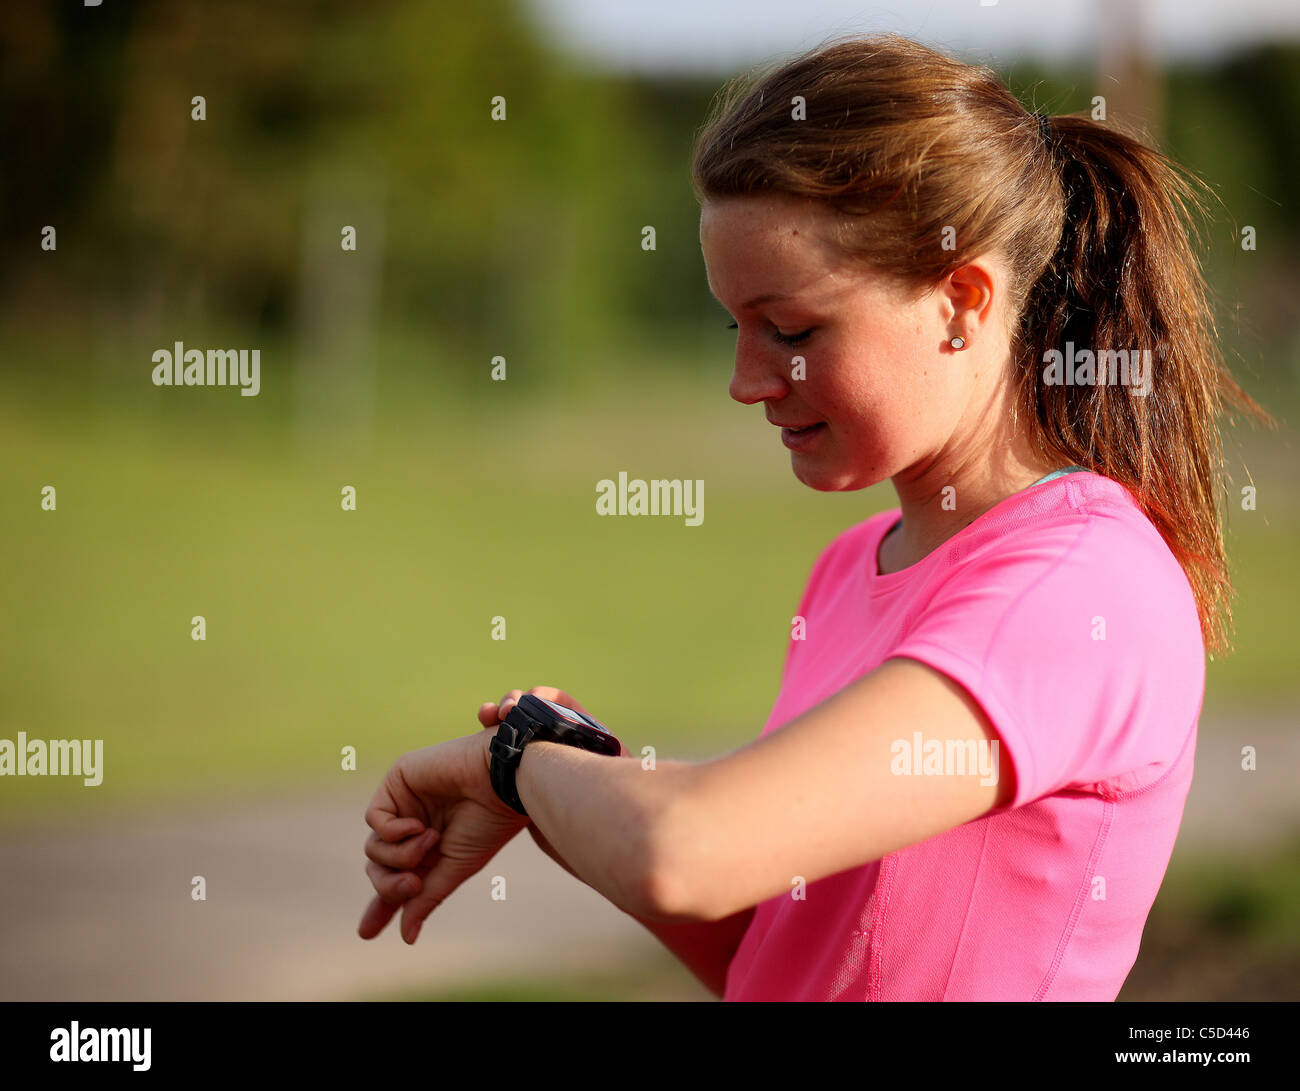 Side view of a brown-haired female runner adjusting heart rate monitor against blurred background Stock Photo